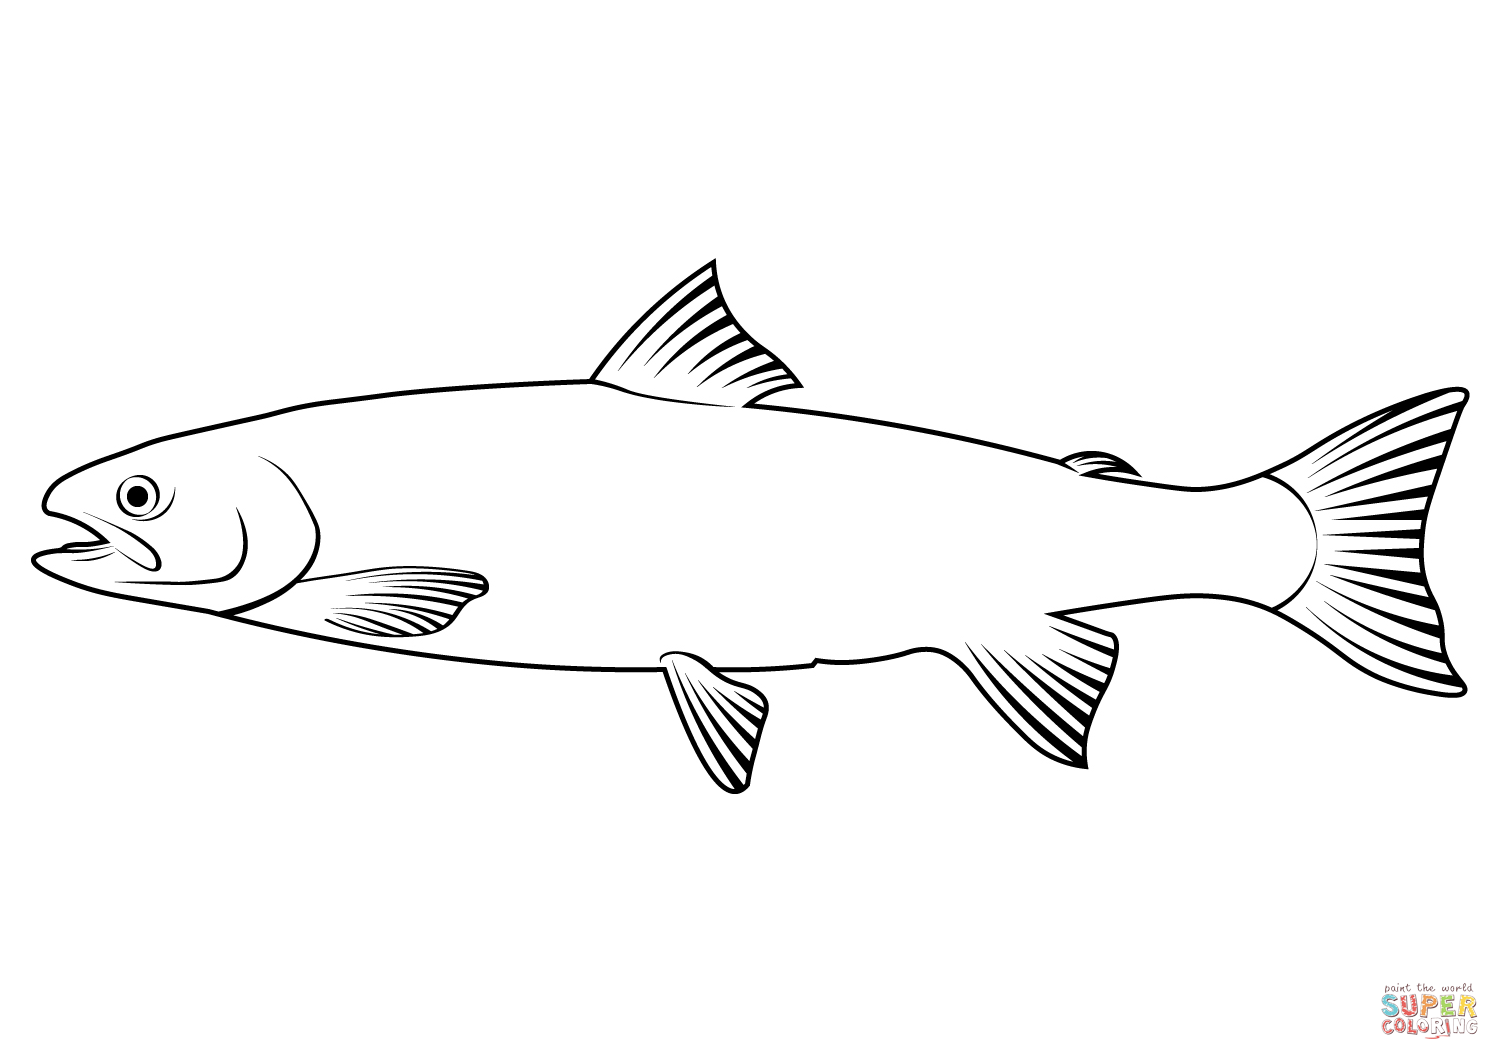 Dolly varden trout salvelinus malma coloring page free printable coloring pages